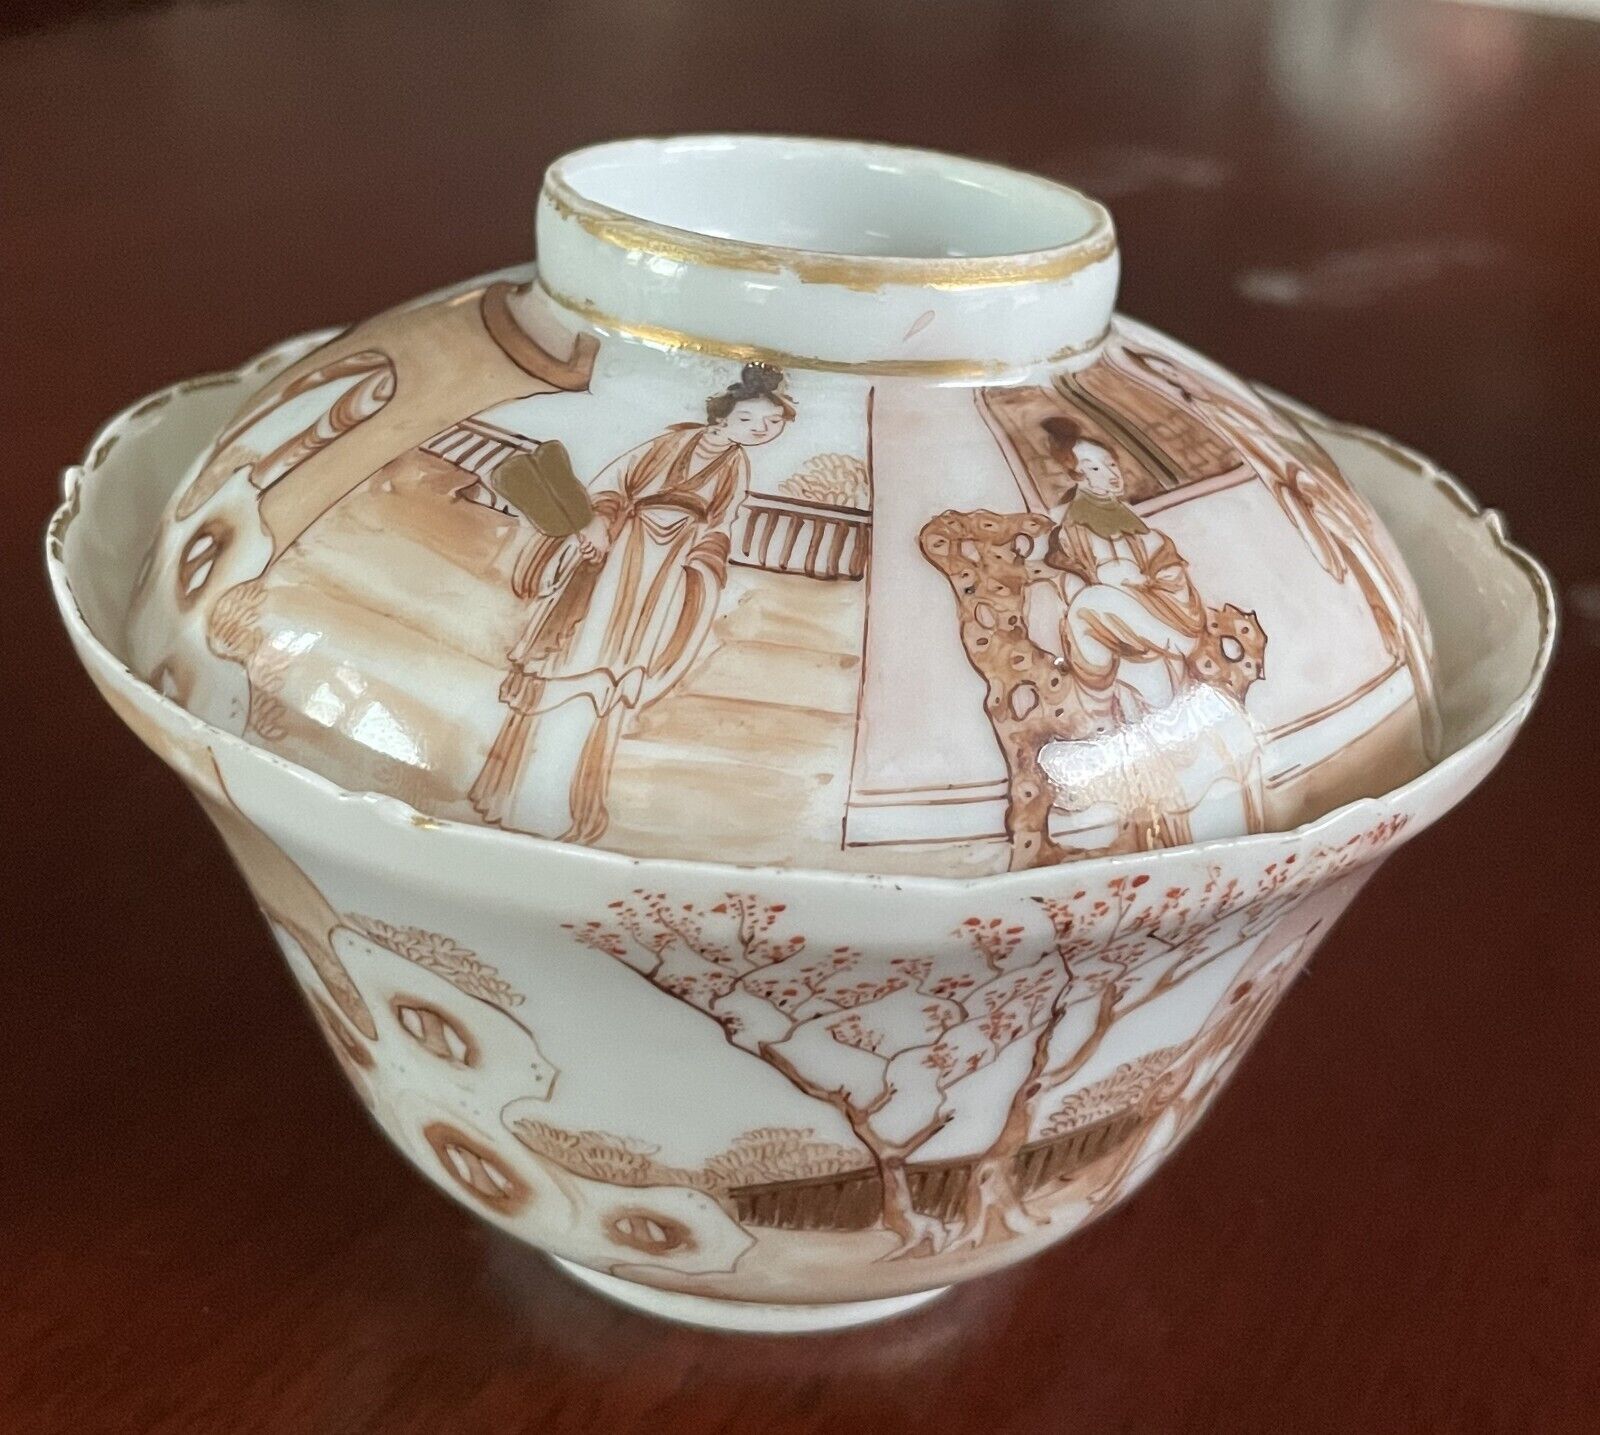 Antique Chinese Qing Dynasty Porcelain Teacup With Ruffled Edge And Lid